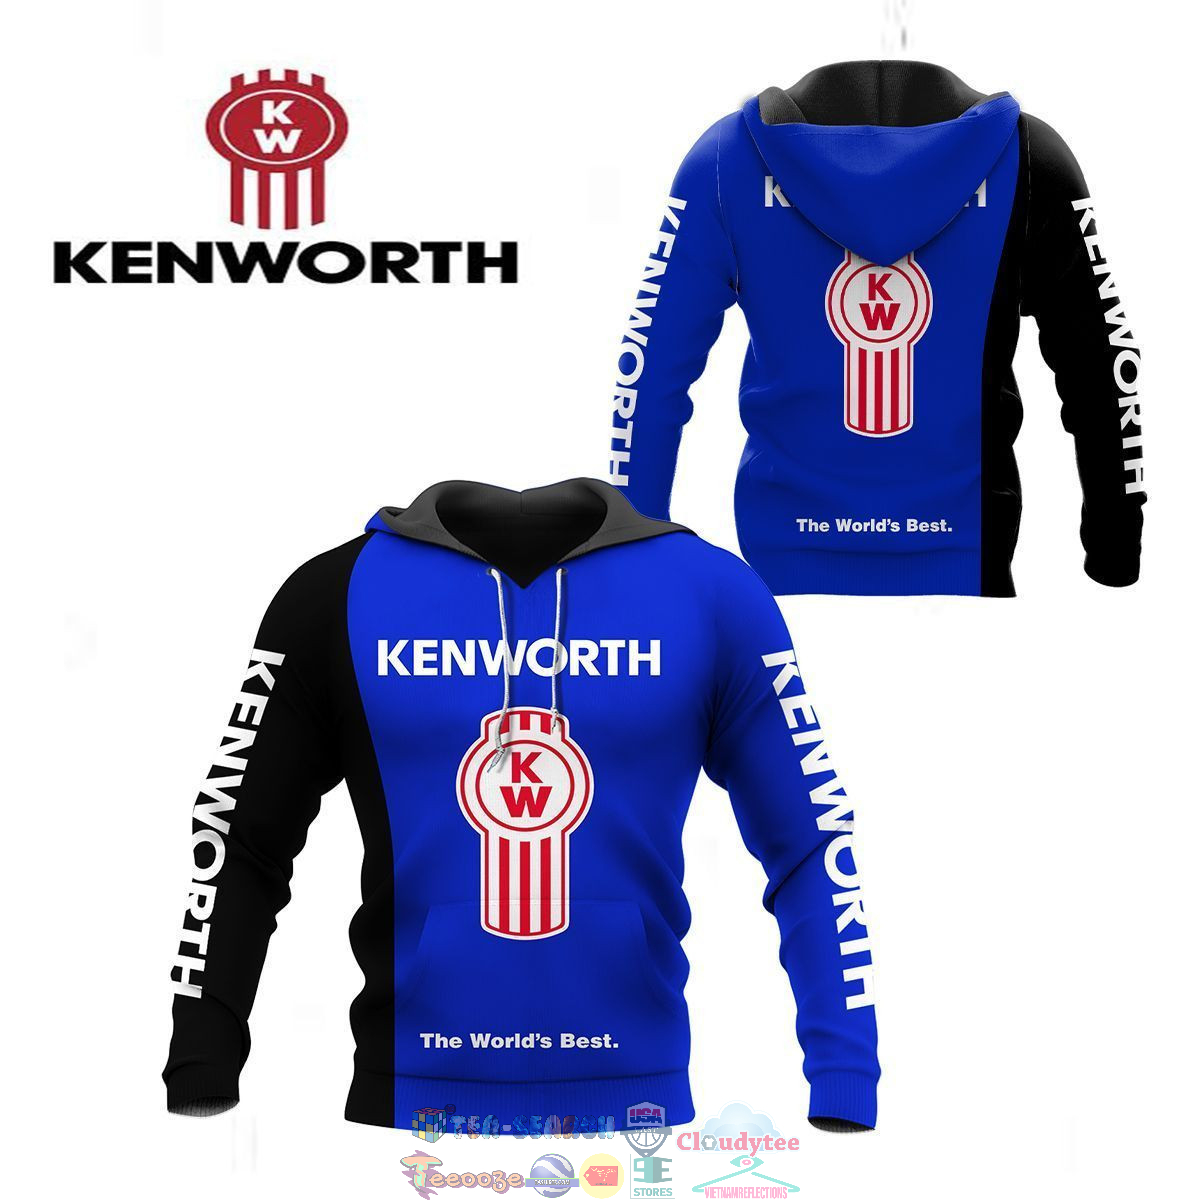 Kenworth ver 2 3D hoodie and t-shirt